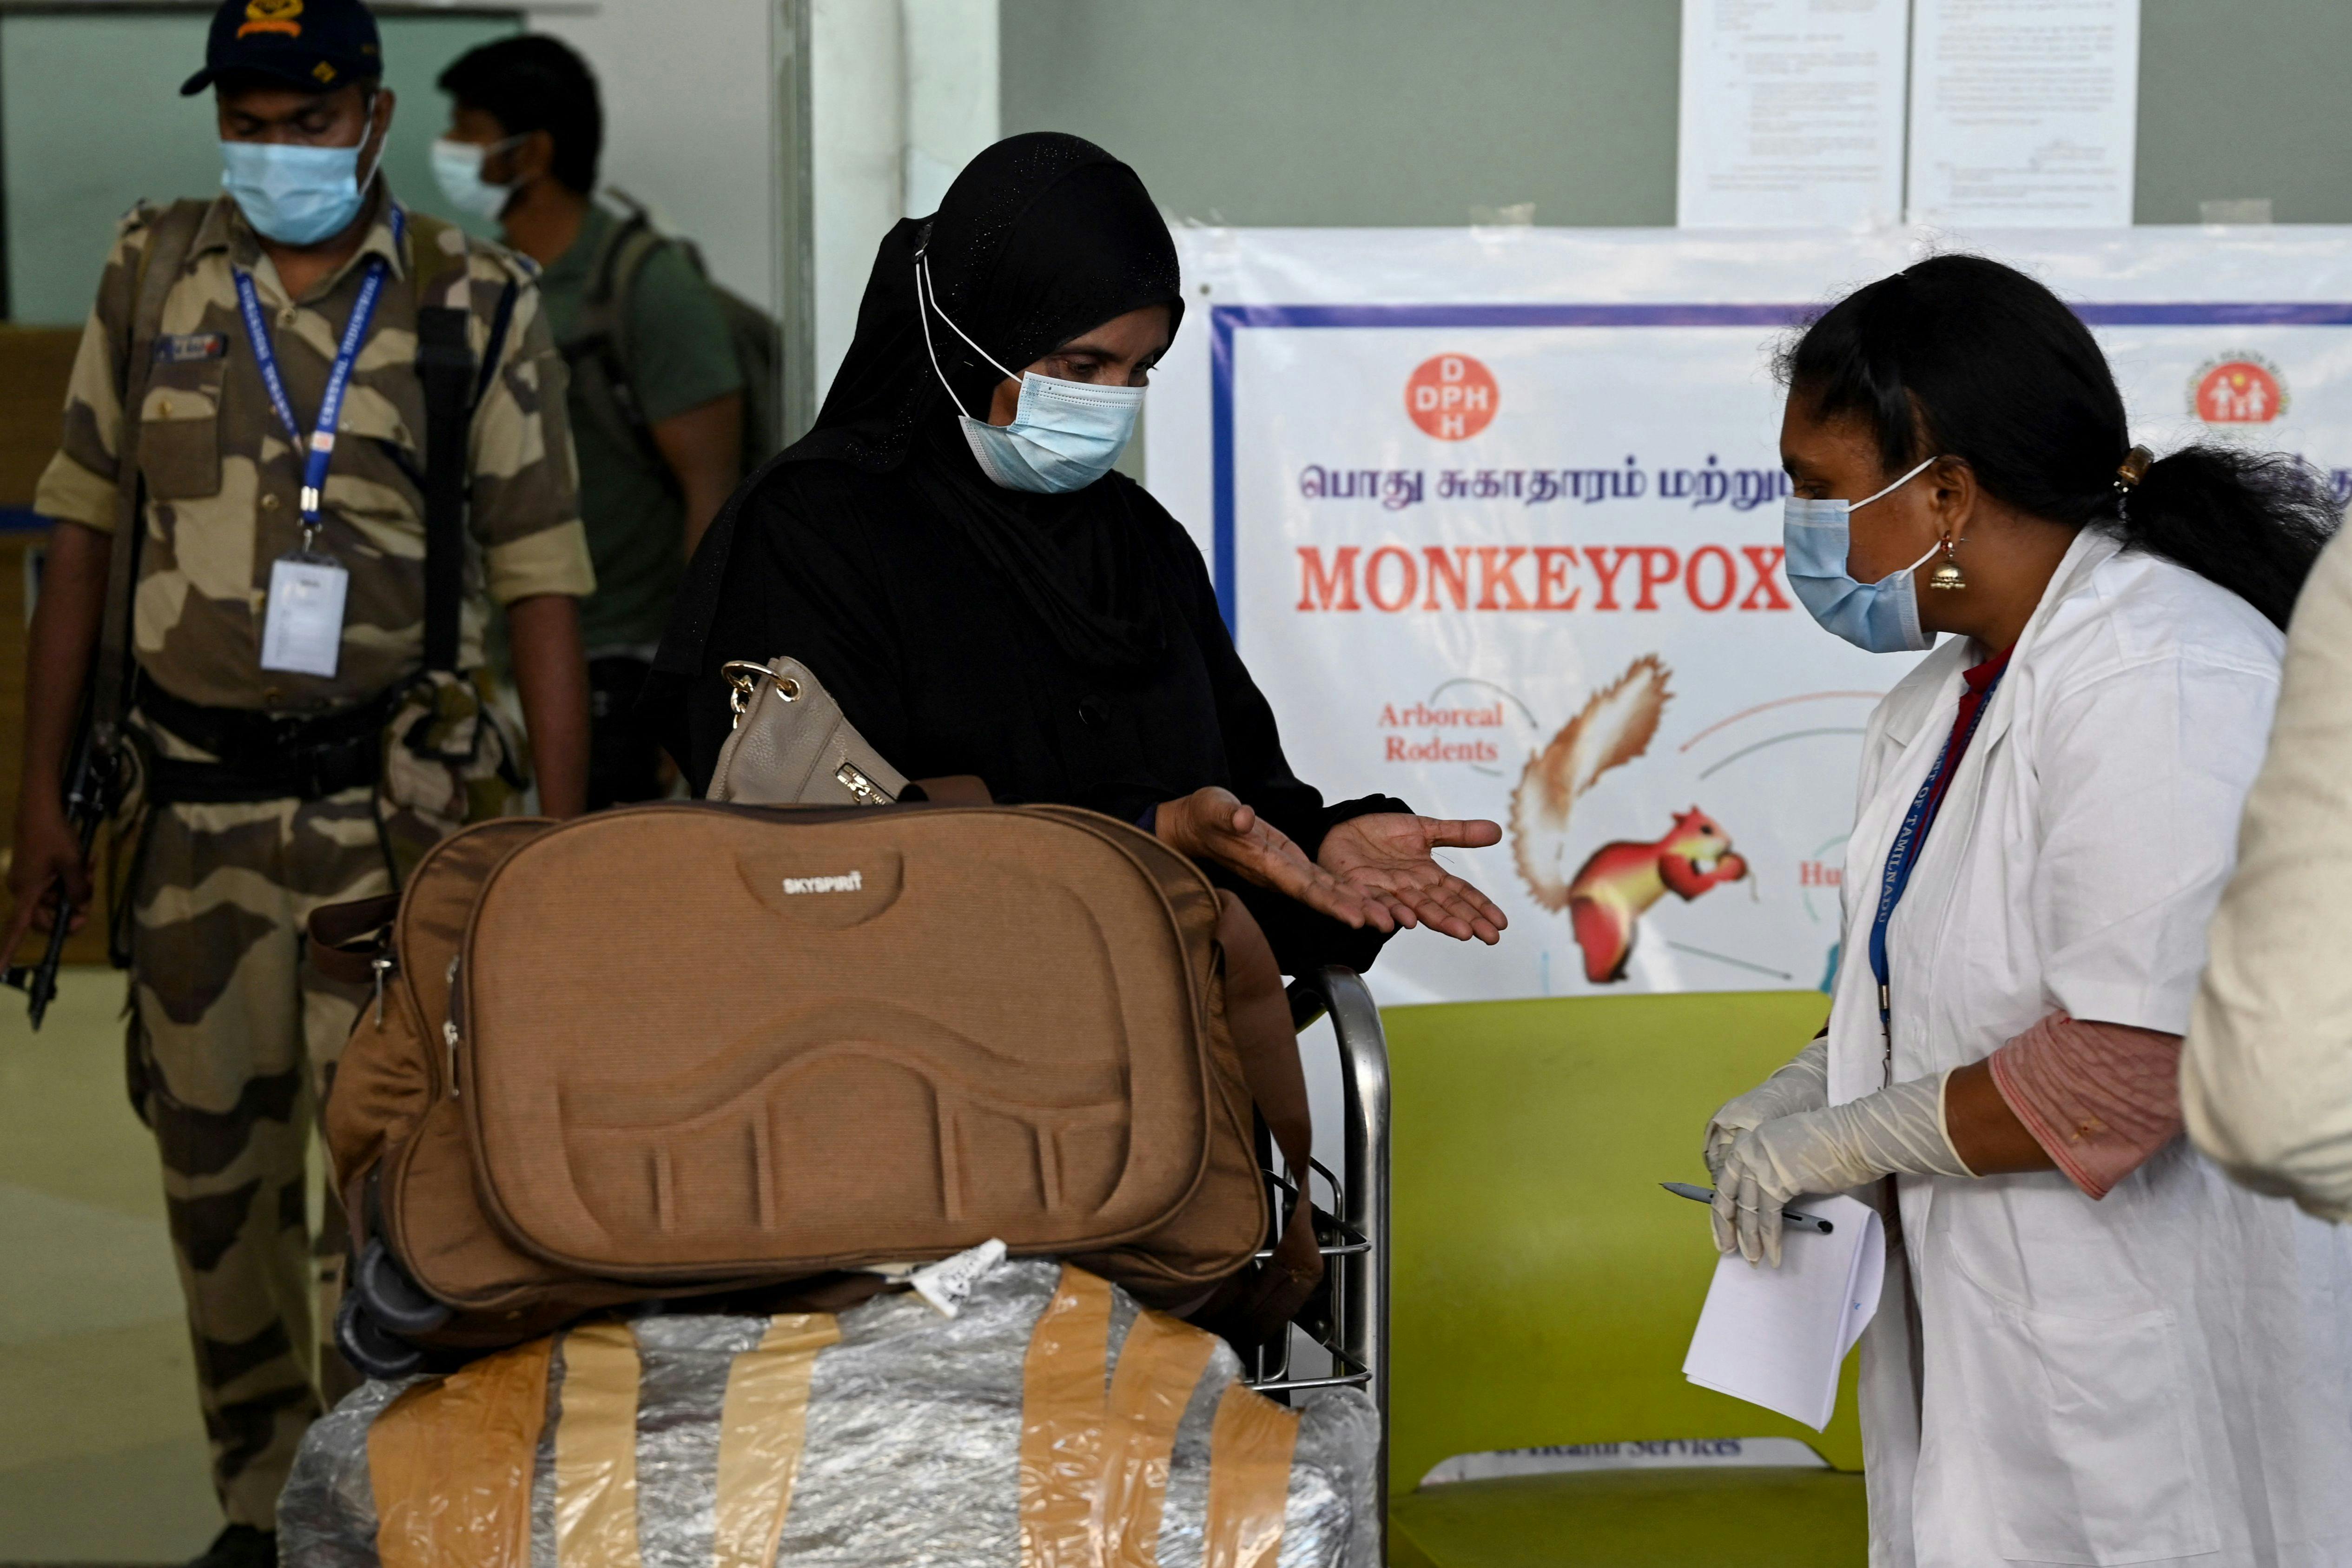 A health worker examines a woman s hands at an airport checkpoint.